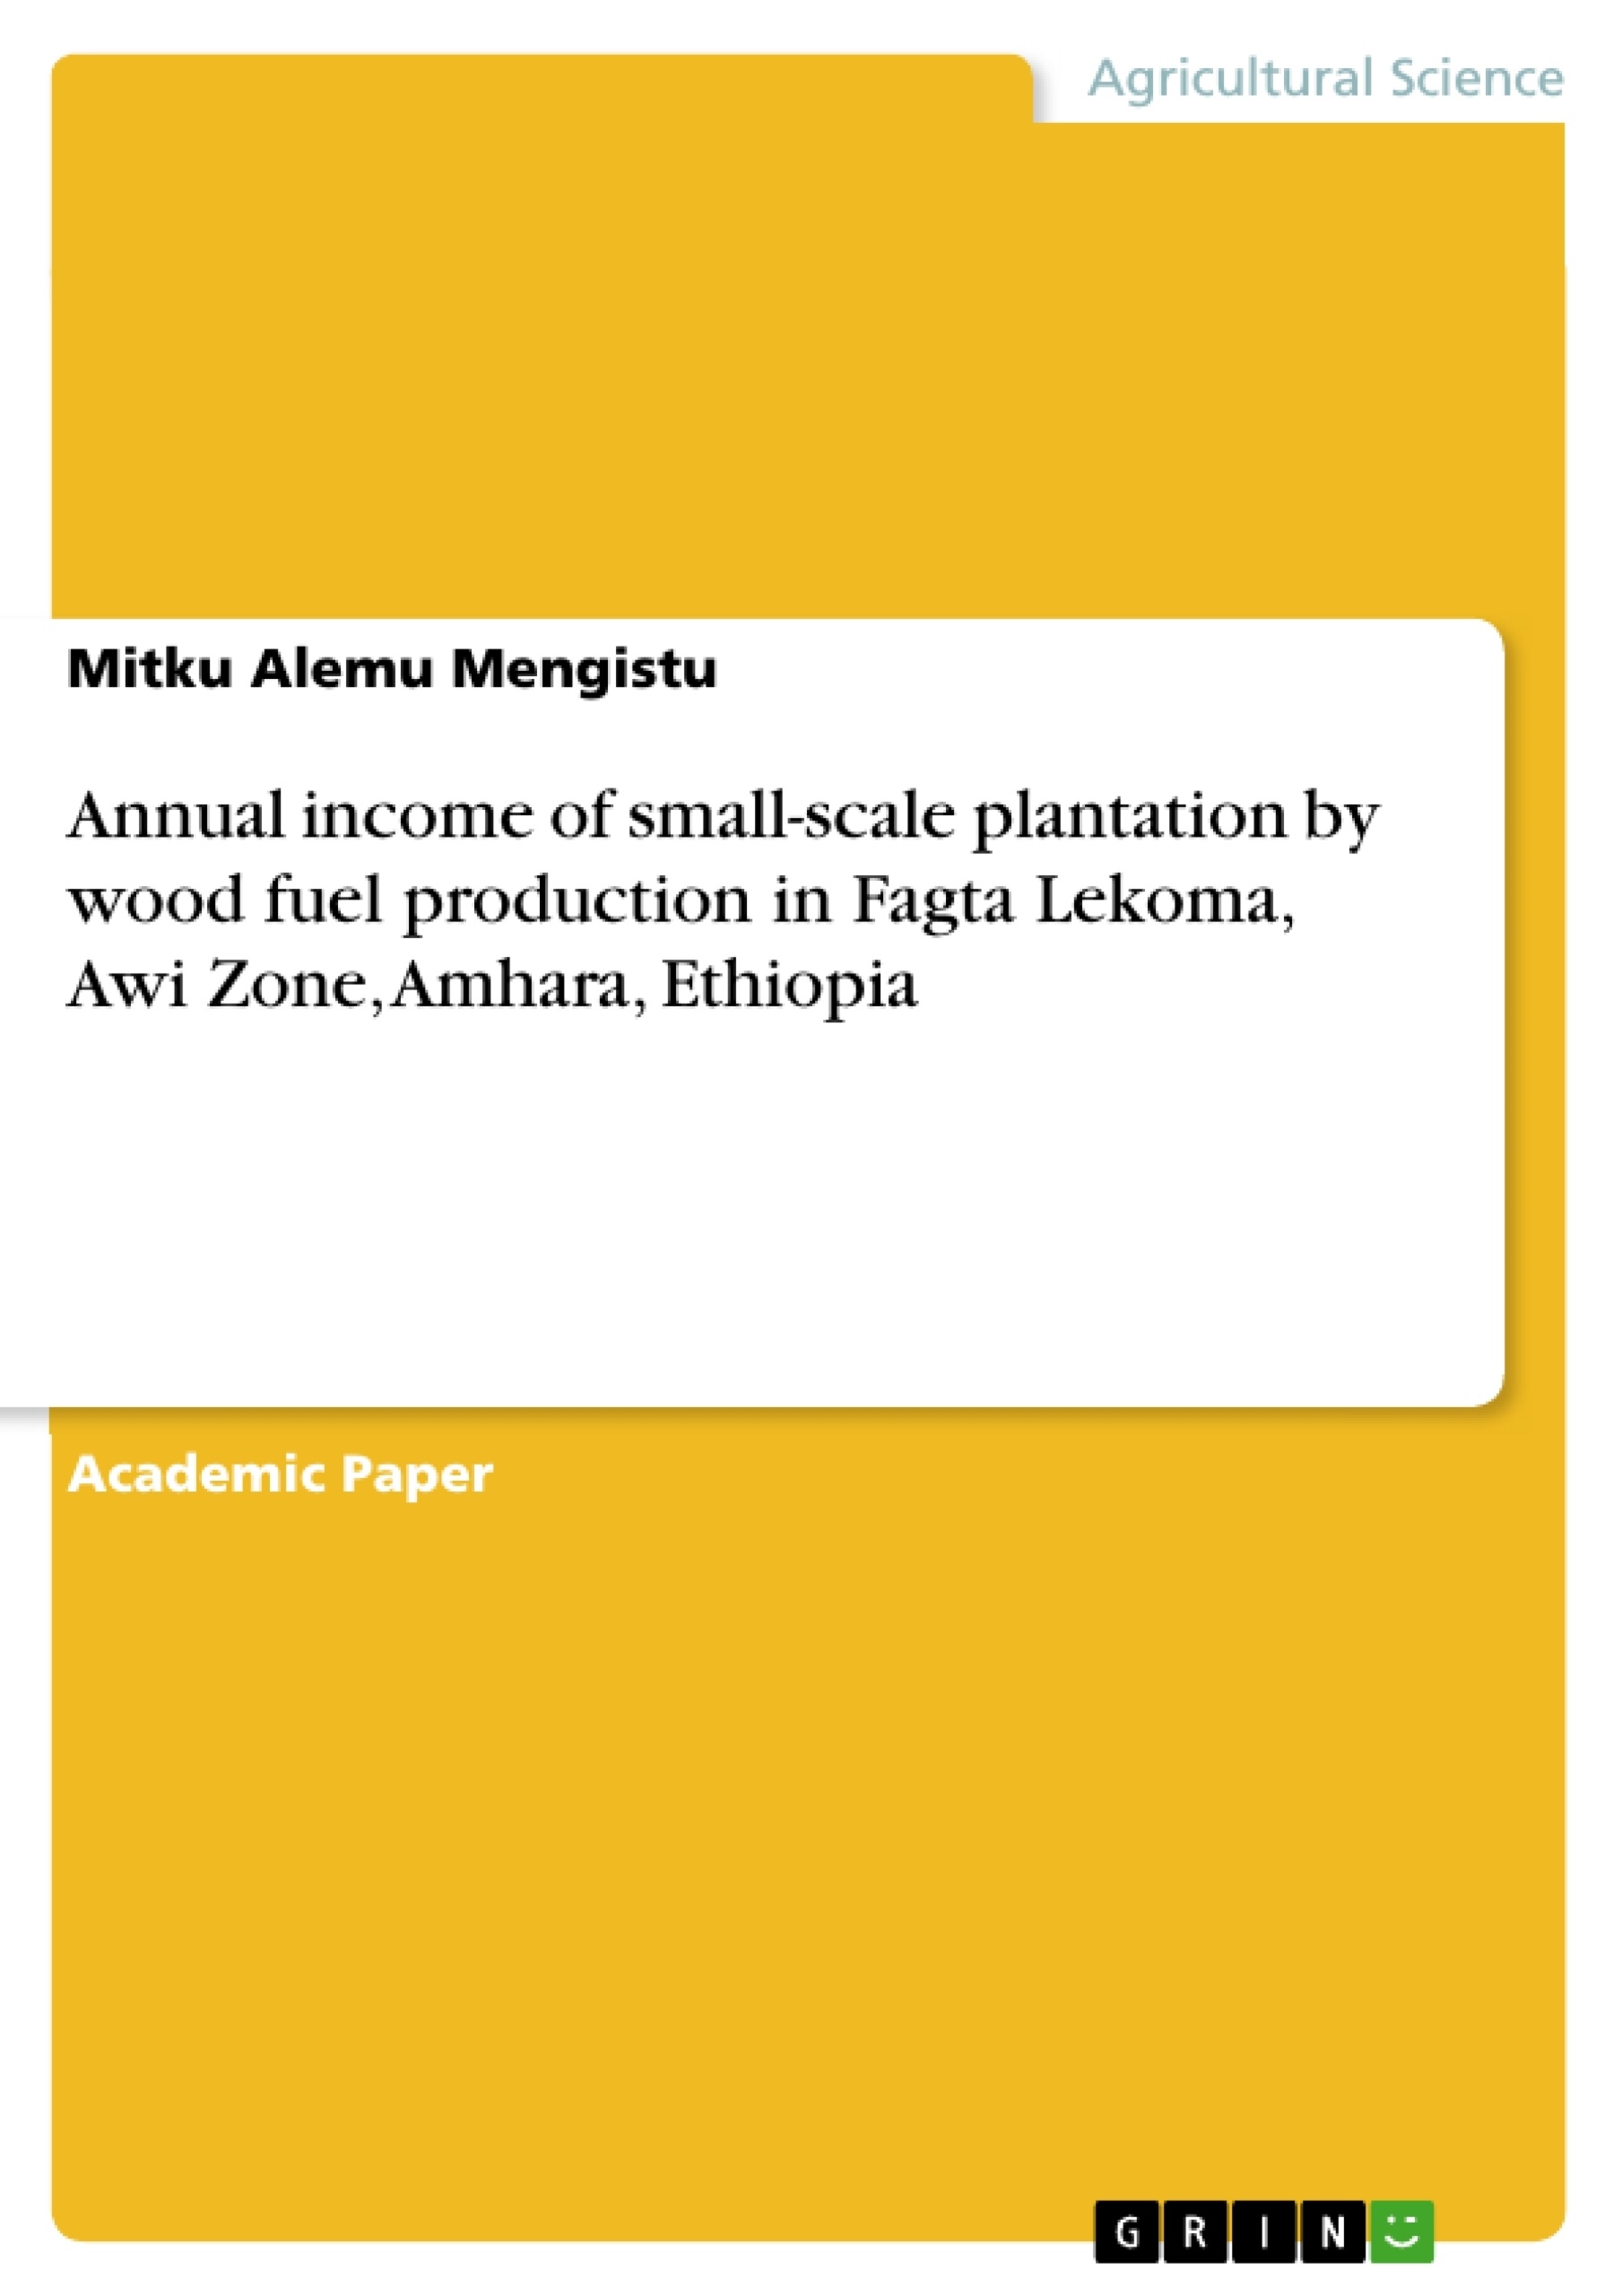 Título: Annual income of small-scale plantation by wood fuel production in Fagta Lekoma, Awi Zone, Amhara, Ethiopia